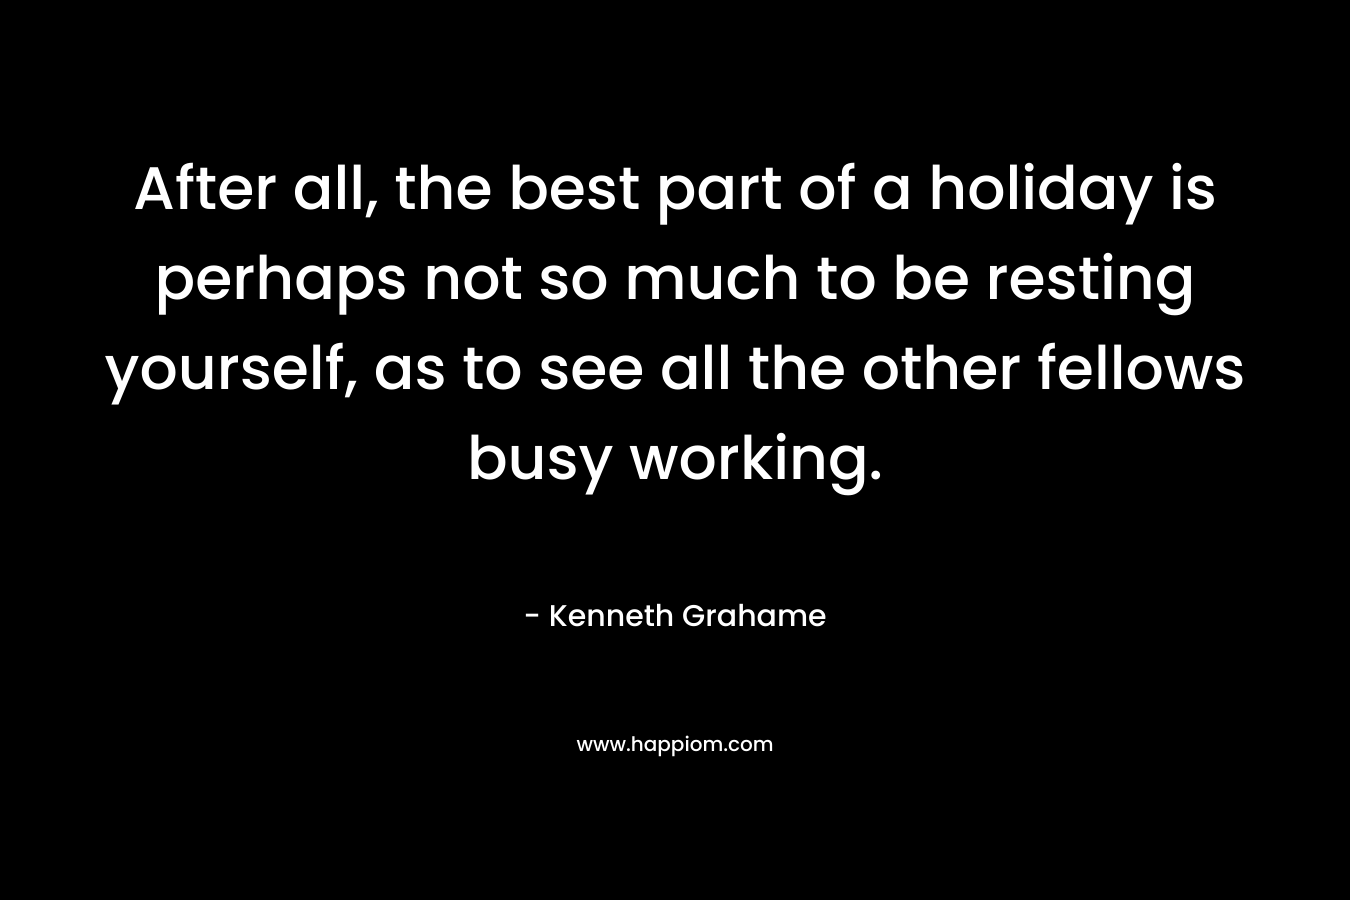 After all, the best part of a holiday is perhaps not so much to be resting yourself, as to see all the other fellows busy working.